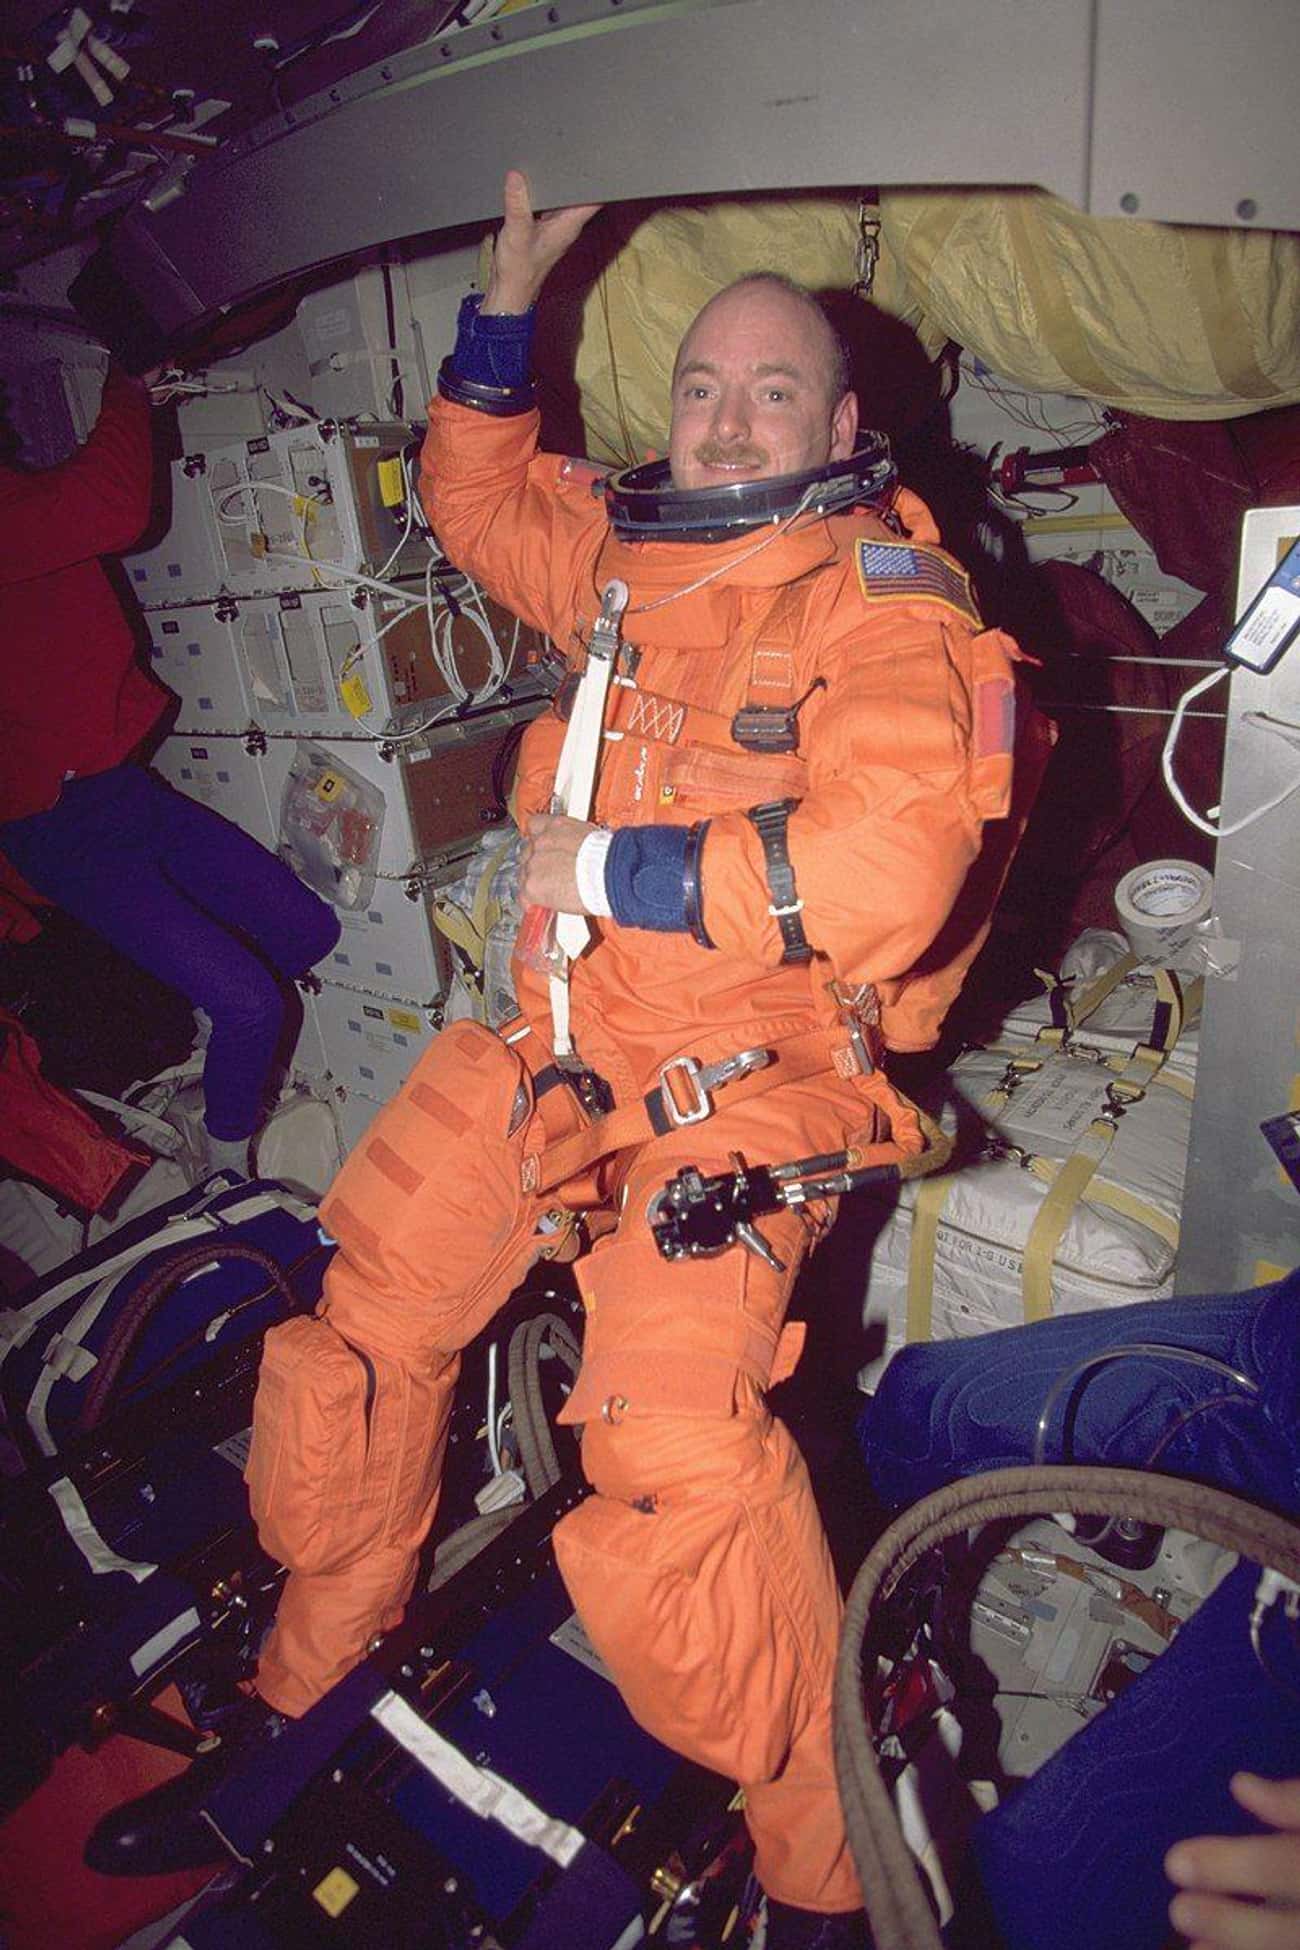 Astronauts Must Drink 730 Liters Of Recycled Sweat And Urine To Live In Space For A Year